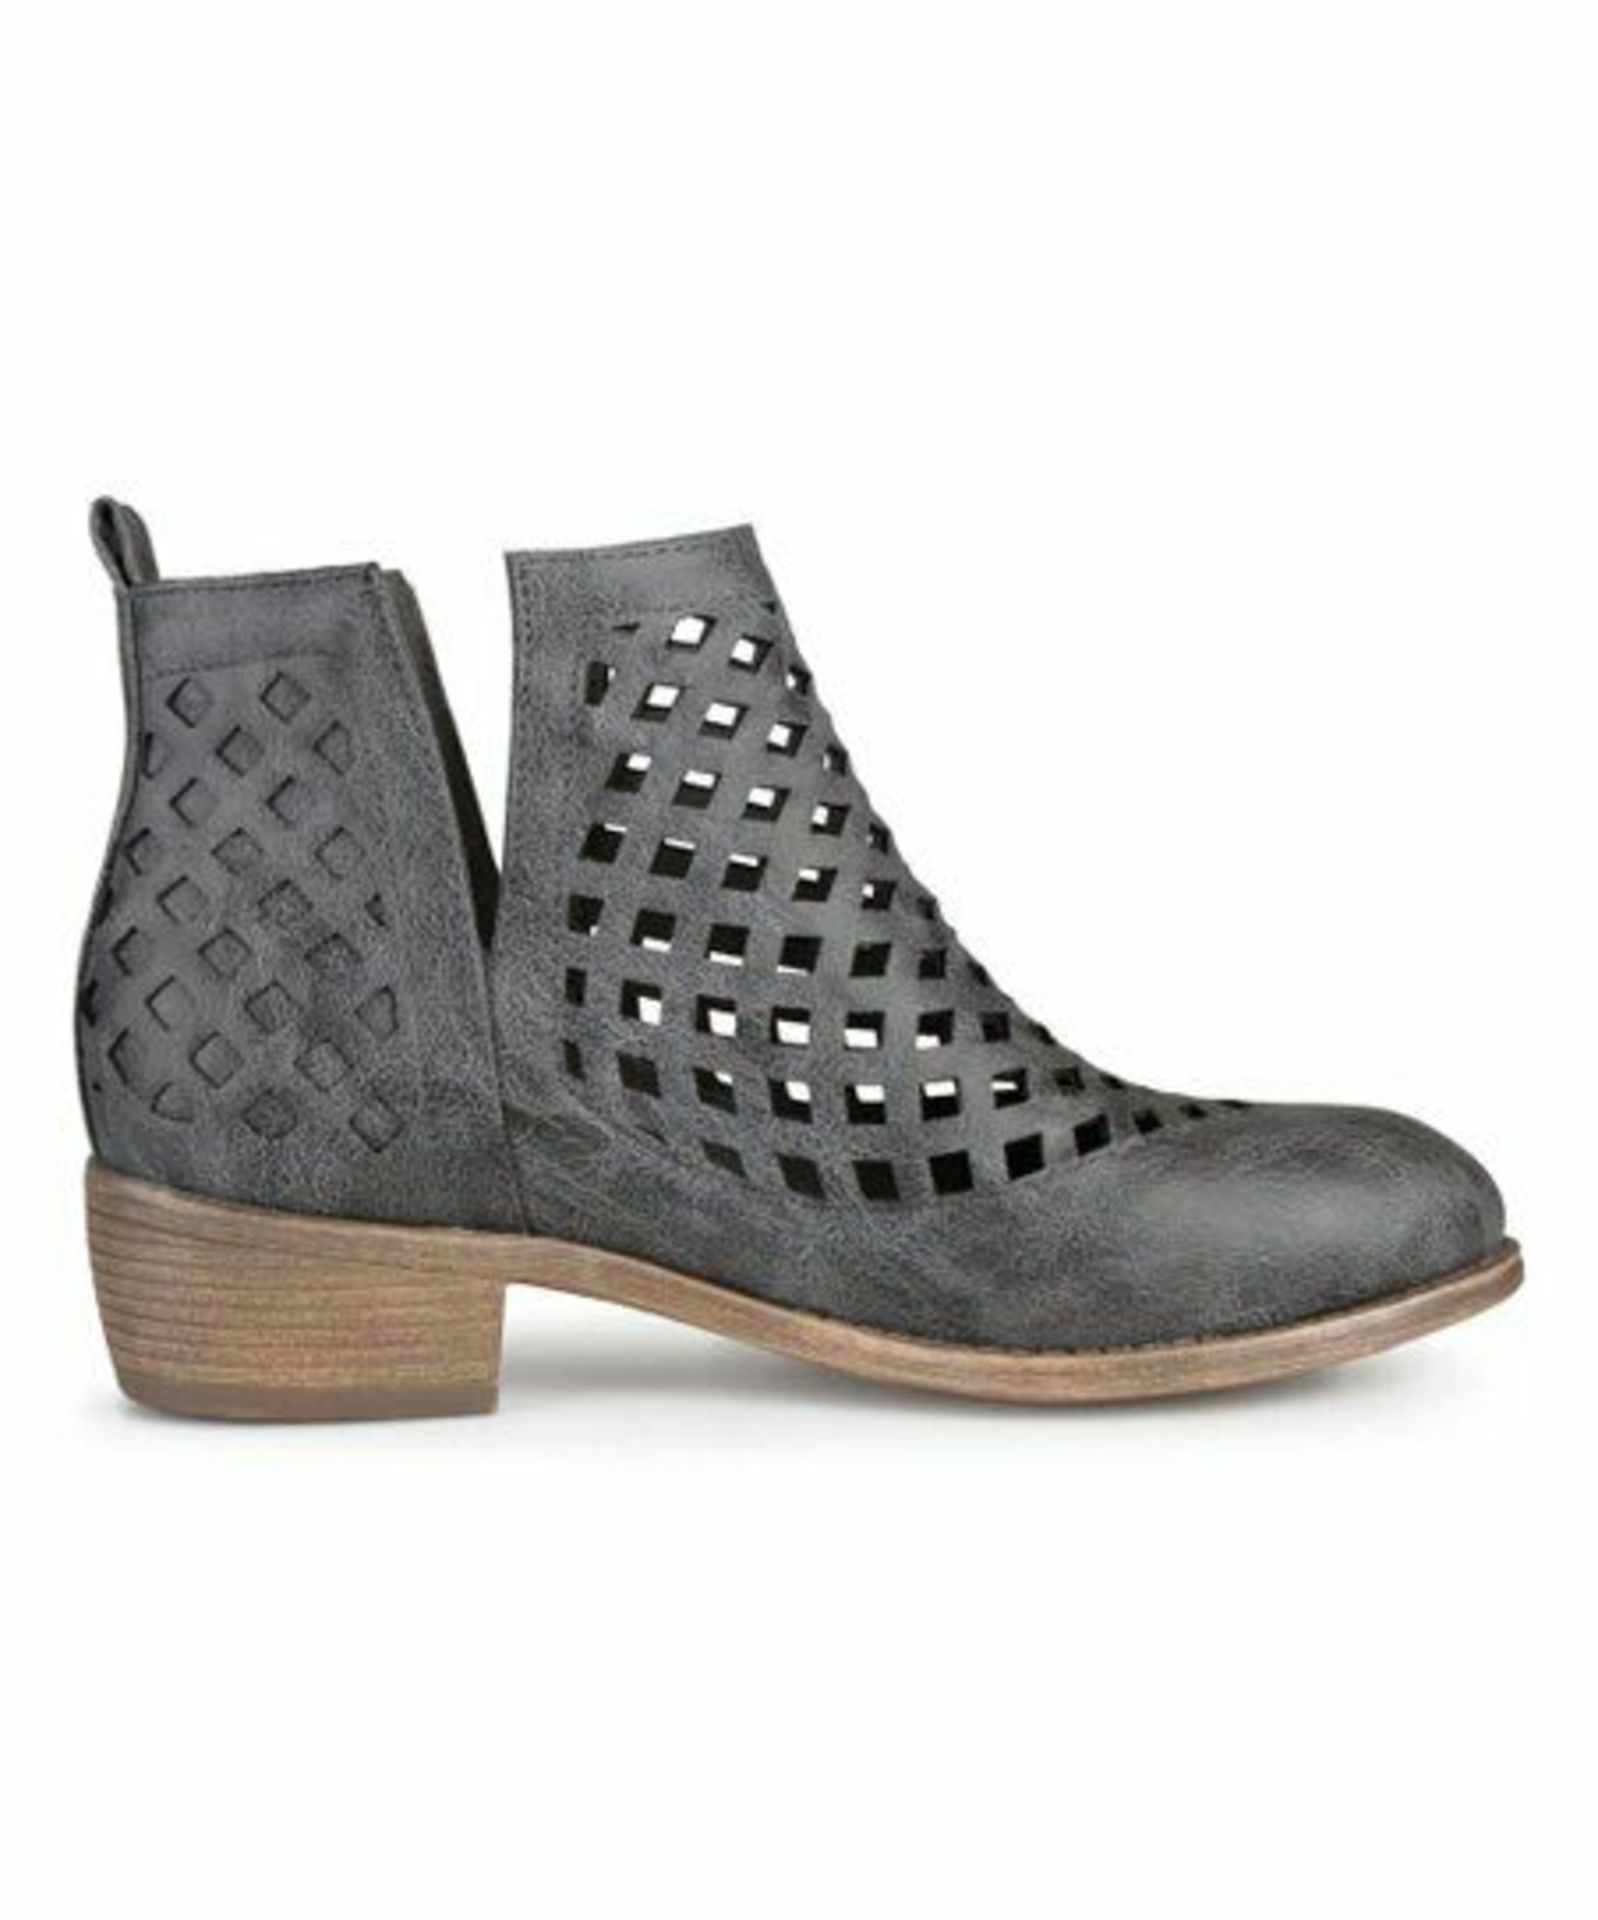 Brinley Co. Gray Cutout Karma Bootie (Uk Size:4/Us Size:6) (New With Box) [Ref: 40488588-B-003] - Image 3 of 4